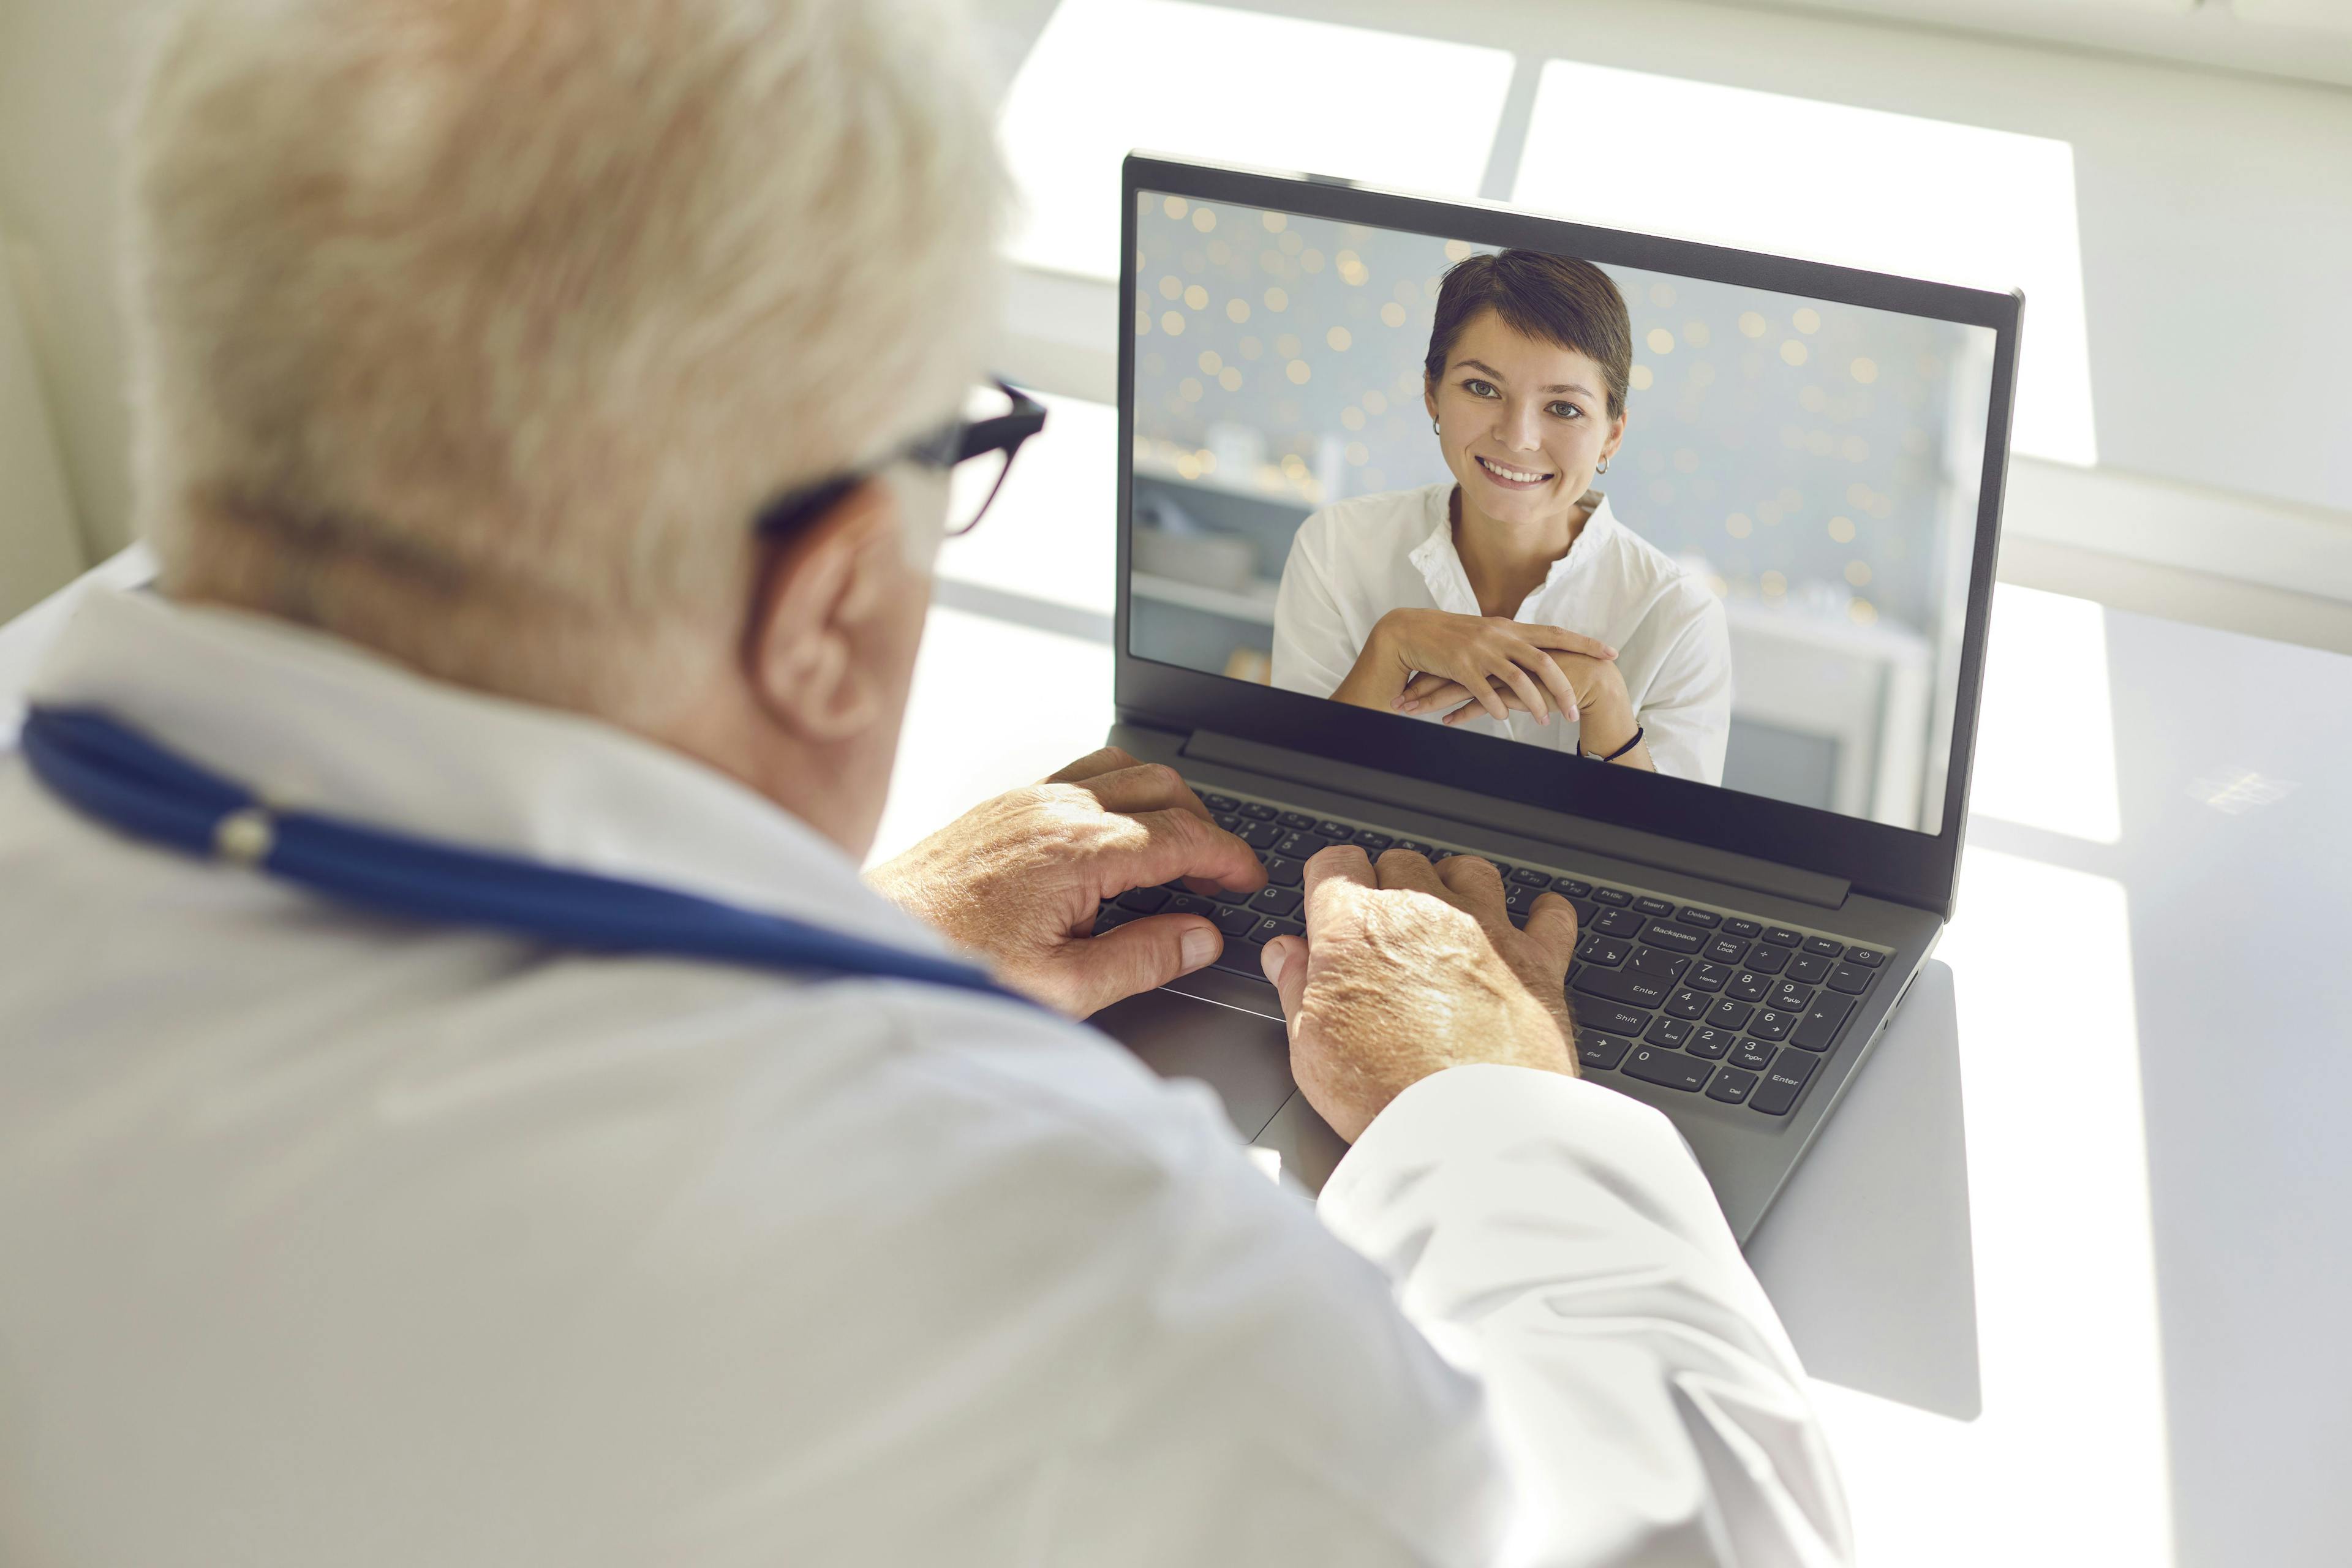 Report on use of telemedicine: 9 takeaways